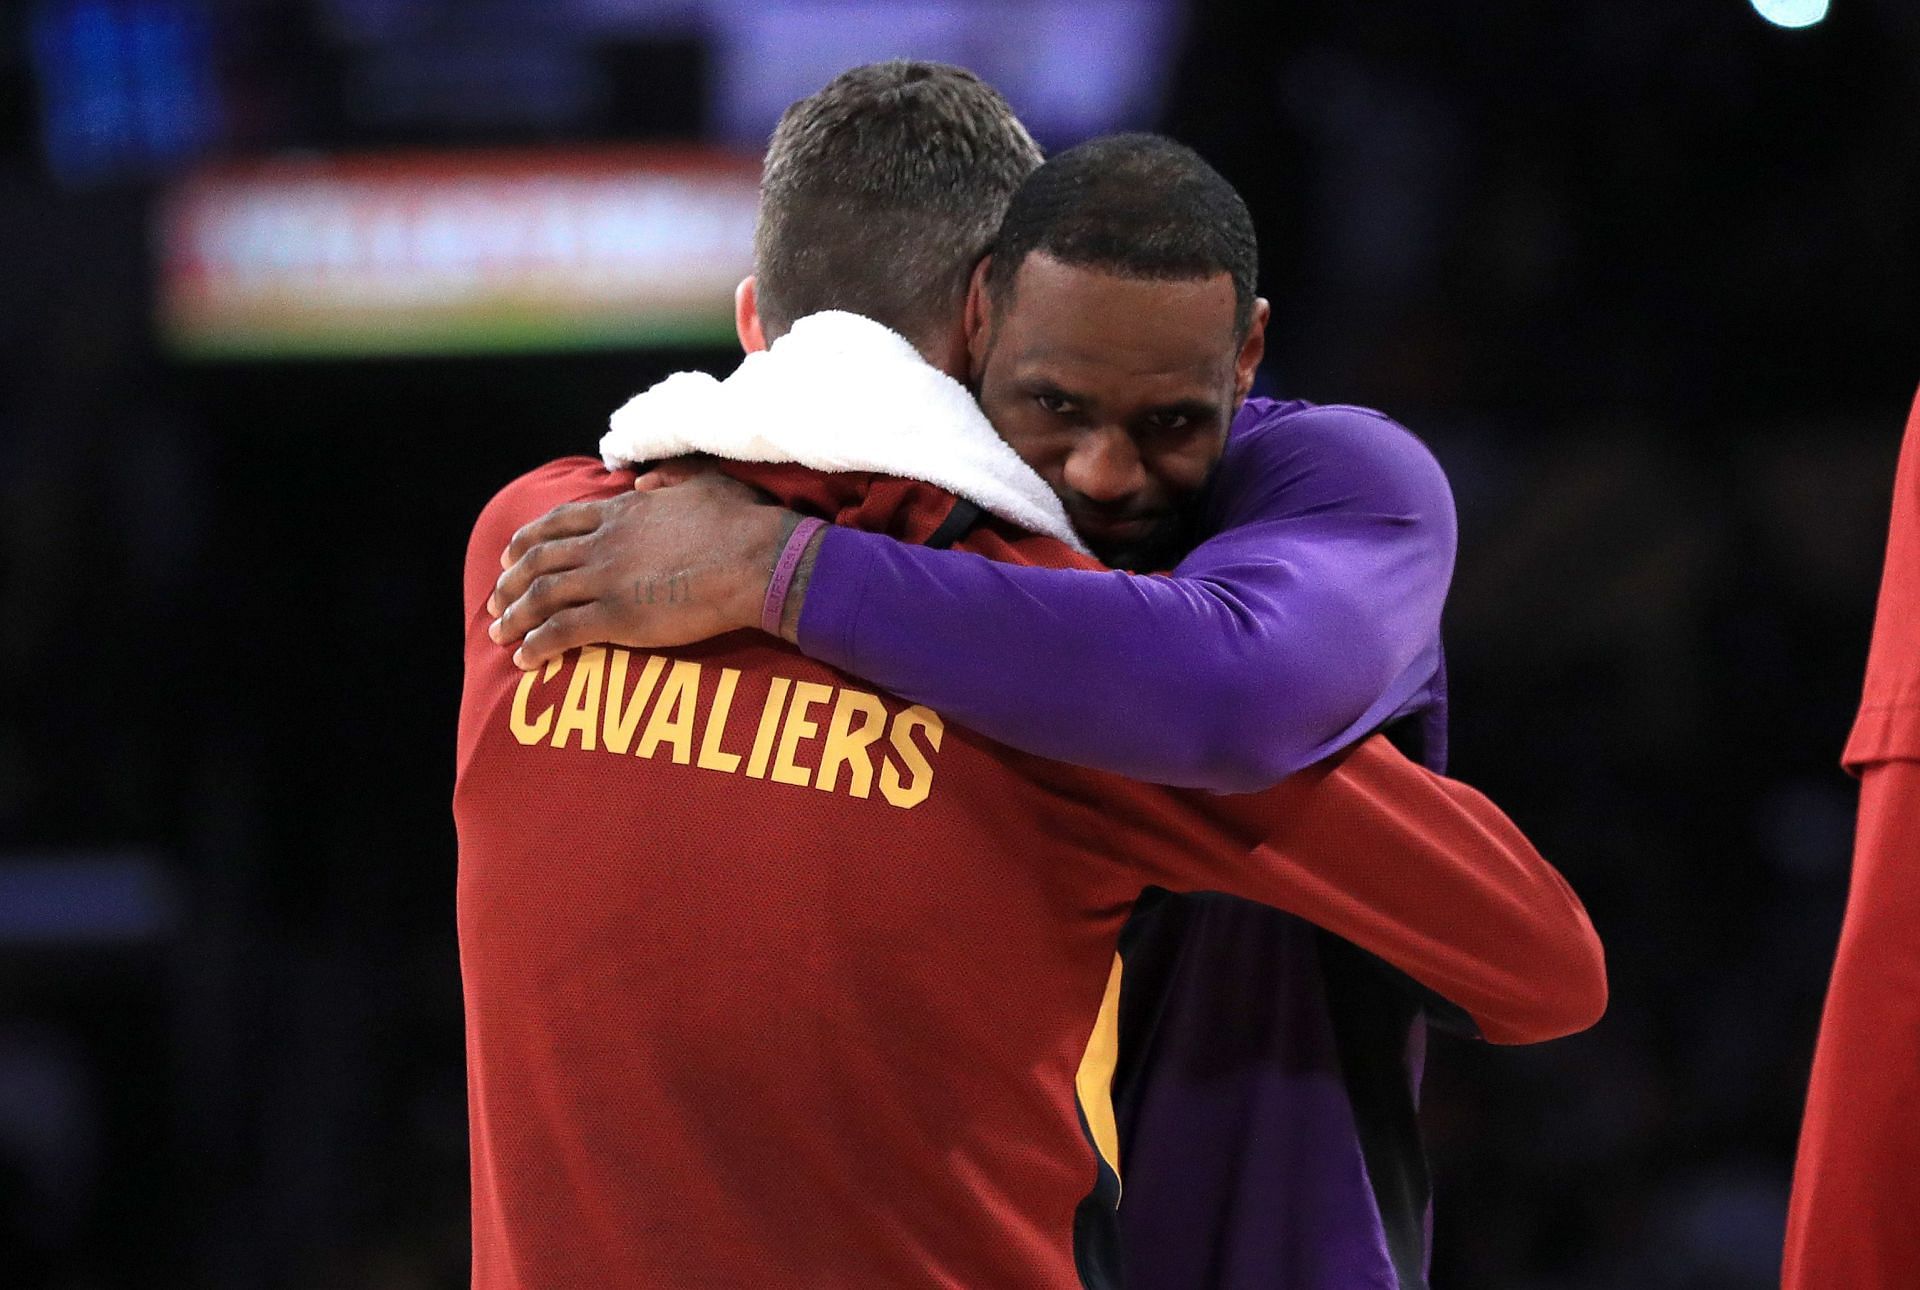 Kevin Love of the Cleveland Cavaliers and LeBron James of the Los Angeles Lakers.